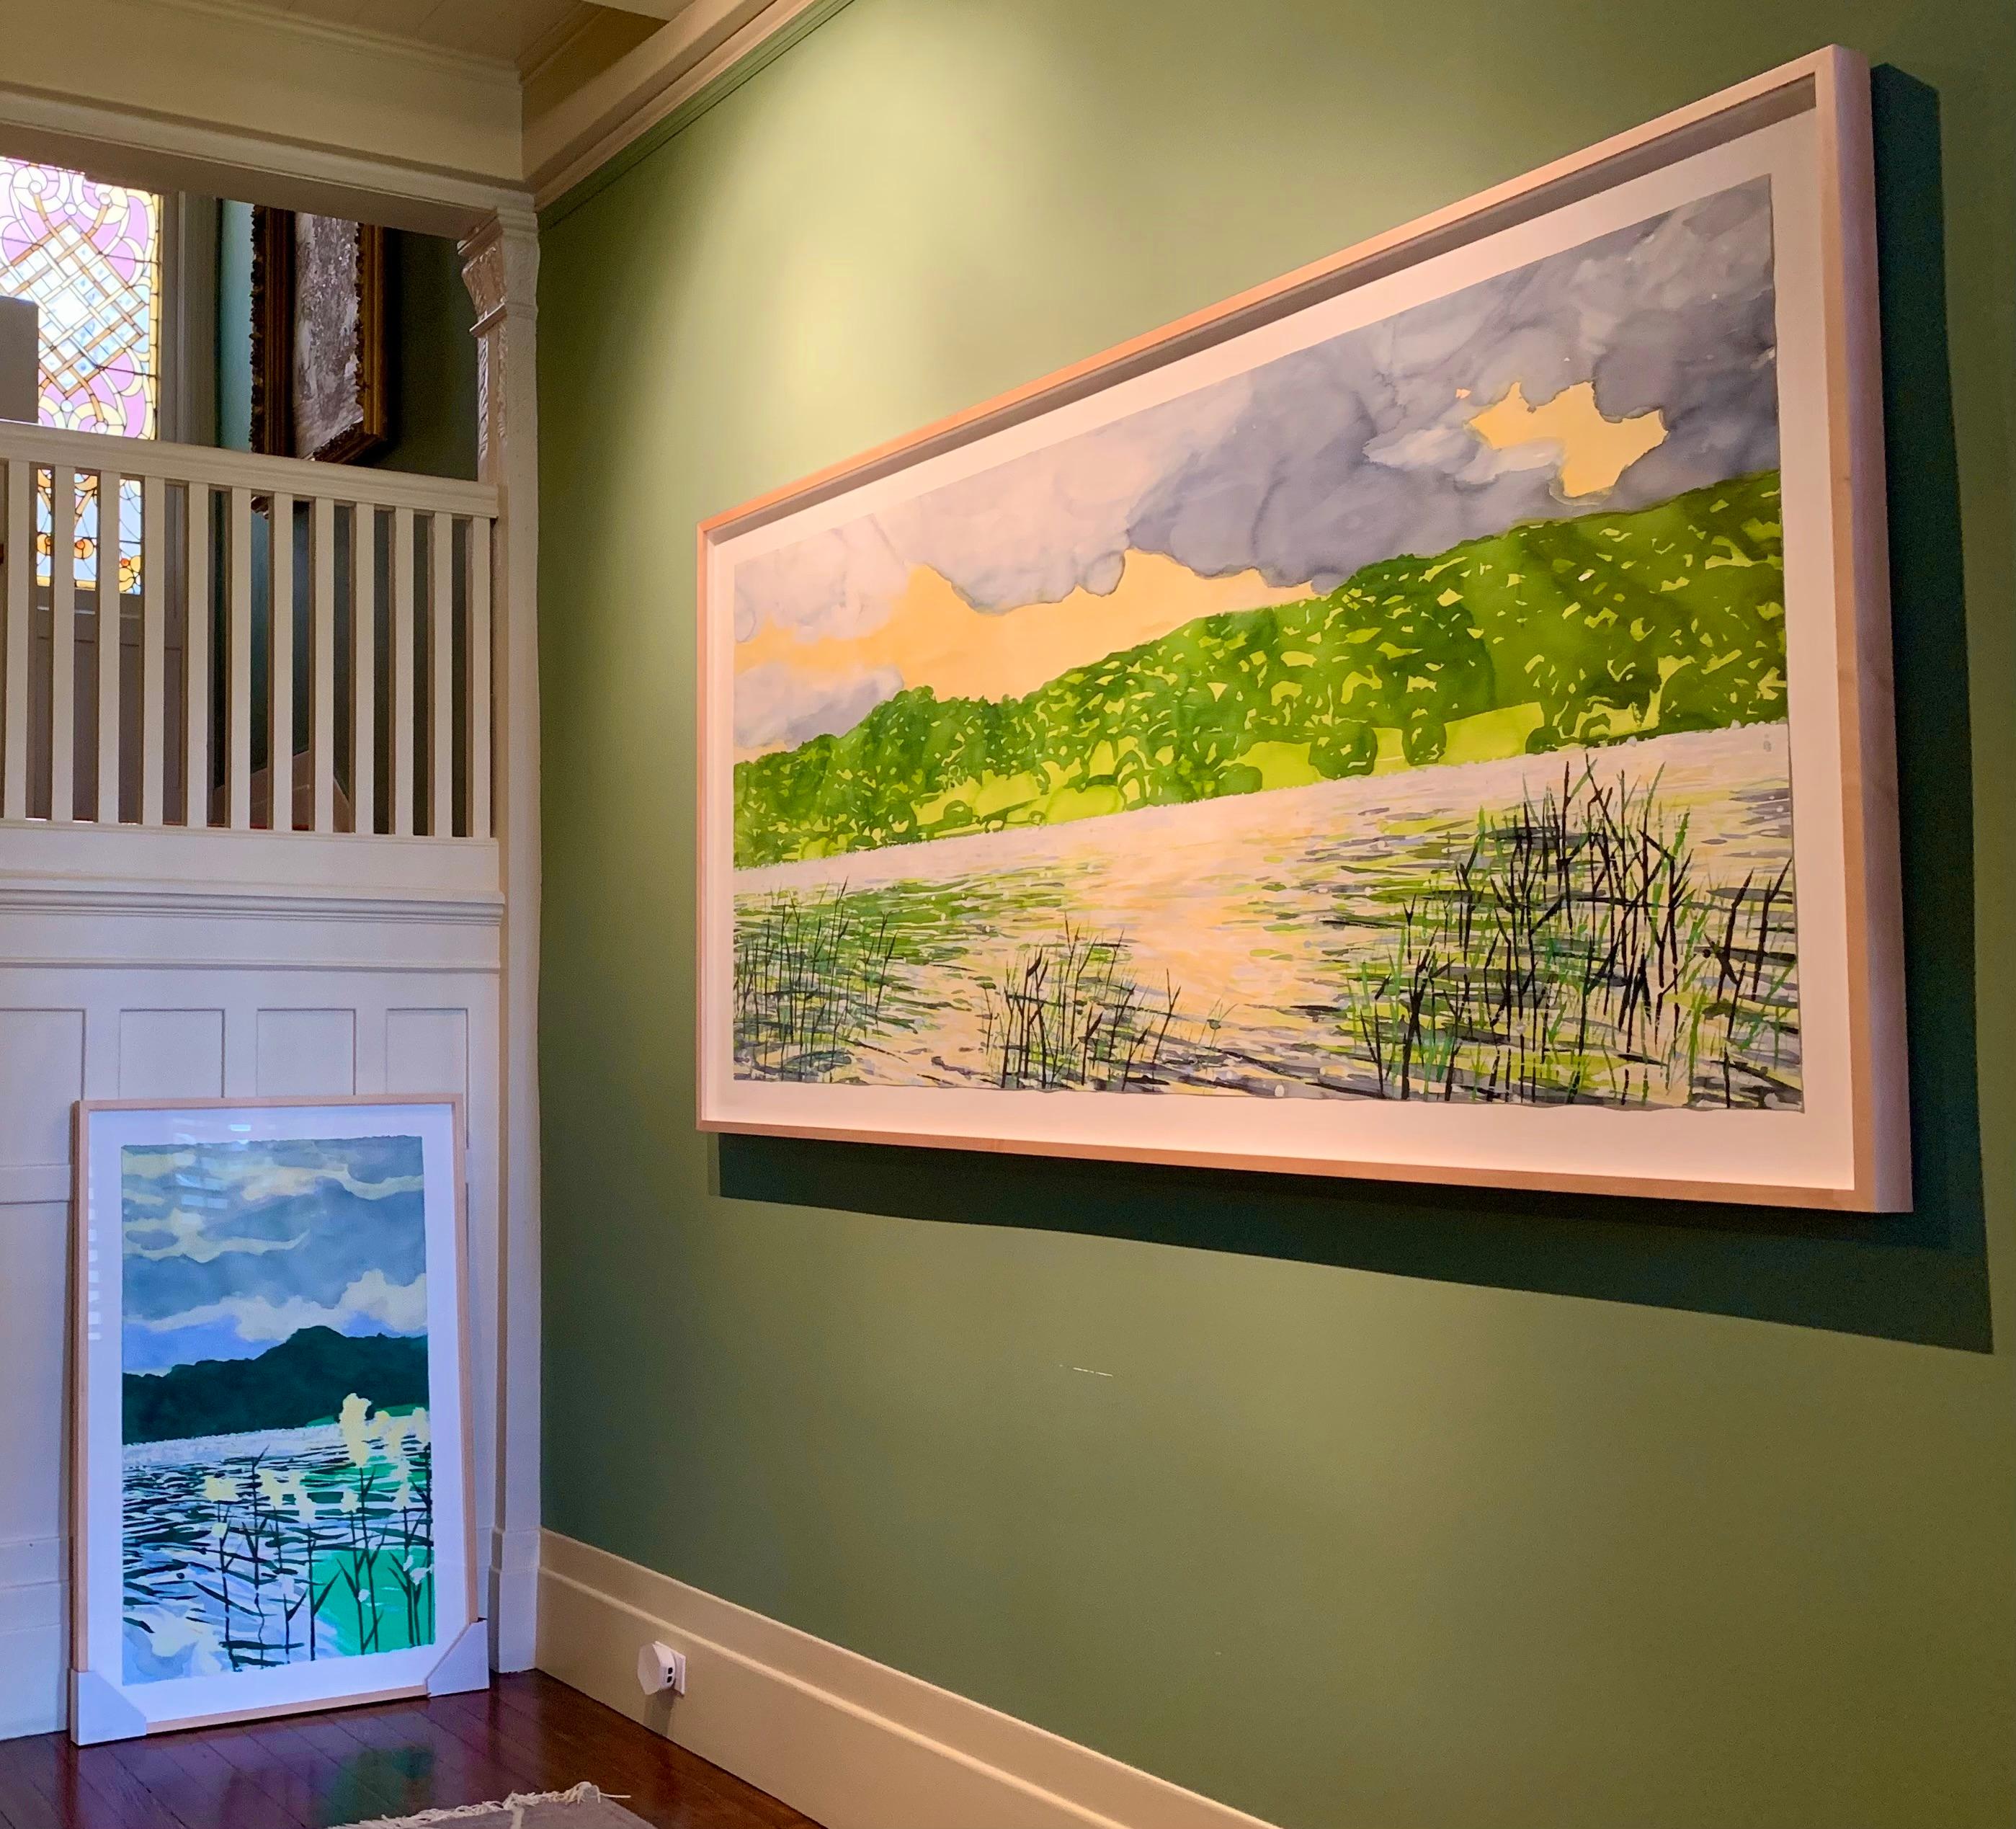 At Grasmere / watercolor, beautifully framed - Art by William Stanisich